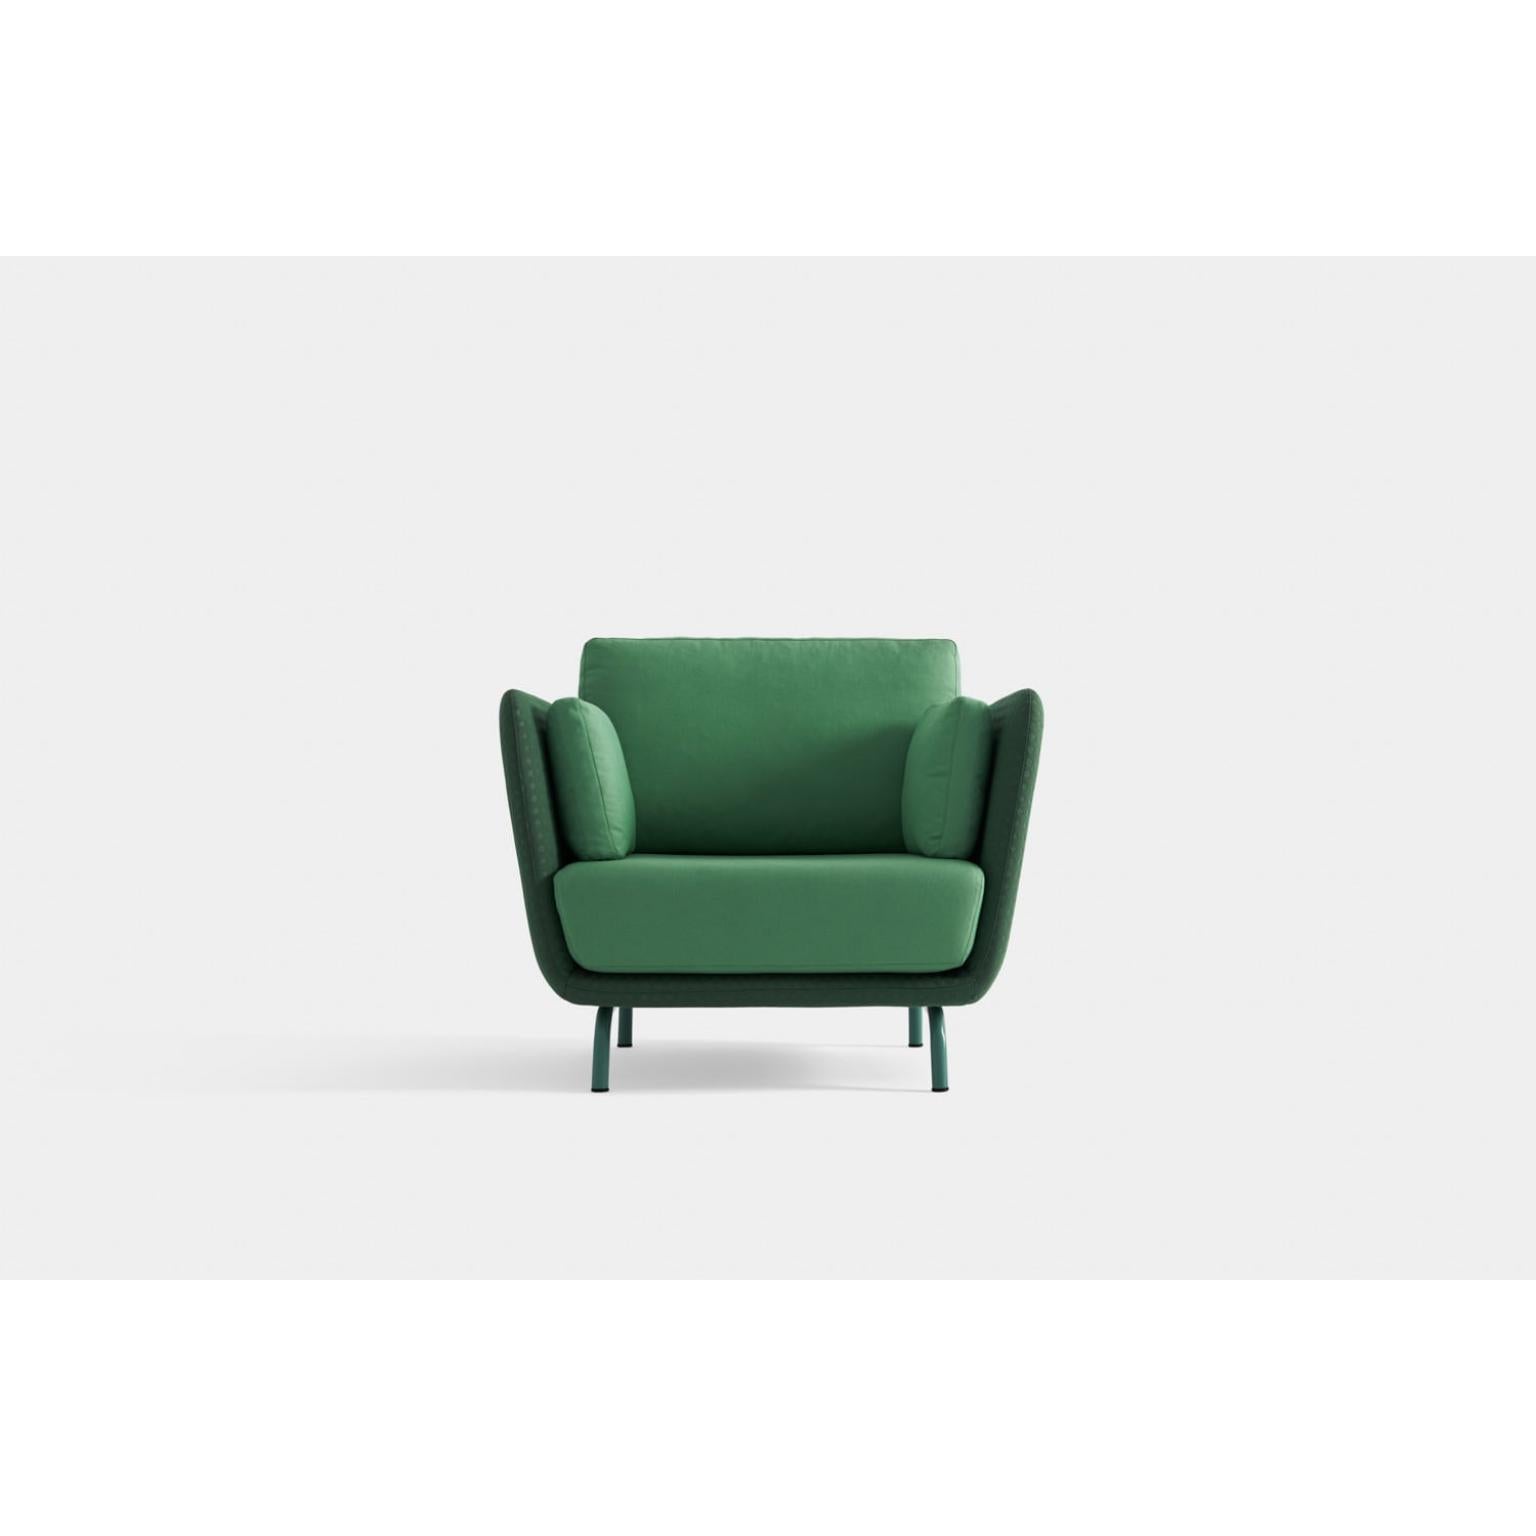 Swan armchair with metal legs by Pepe Albargues
Dimensions: W 100 x D 93 x H 92 cm
Materials: iron, fibre MDF, Foam CMHR 

Variations of materials are avaliable
Swan is a collection made up of an armchair and a sofa inspired by the beauty and